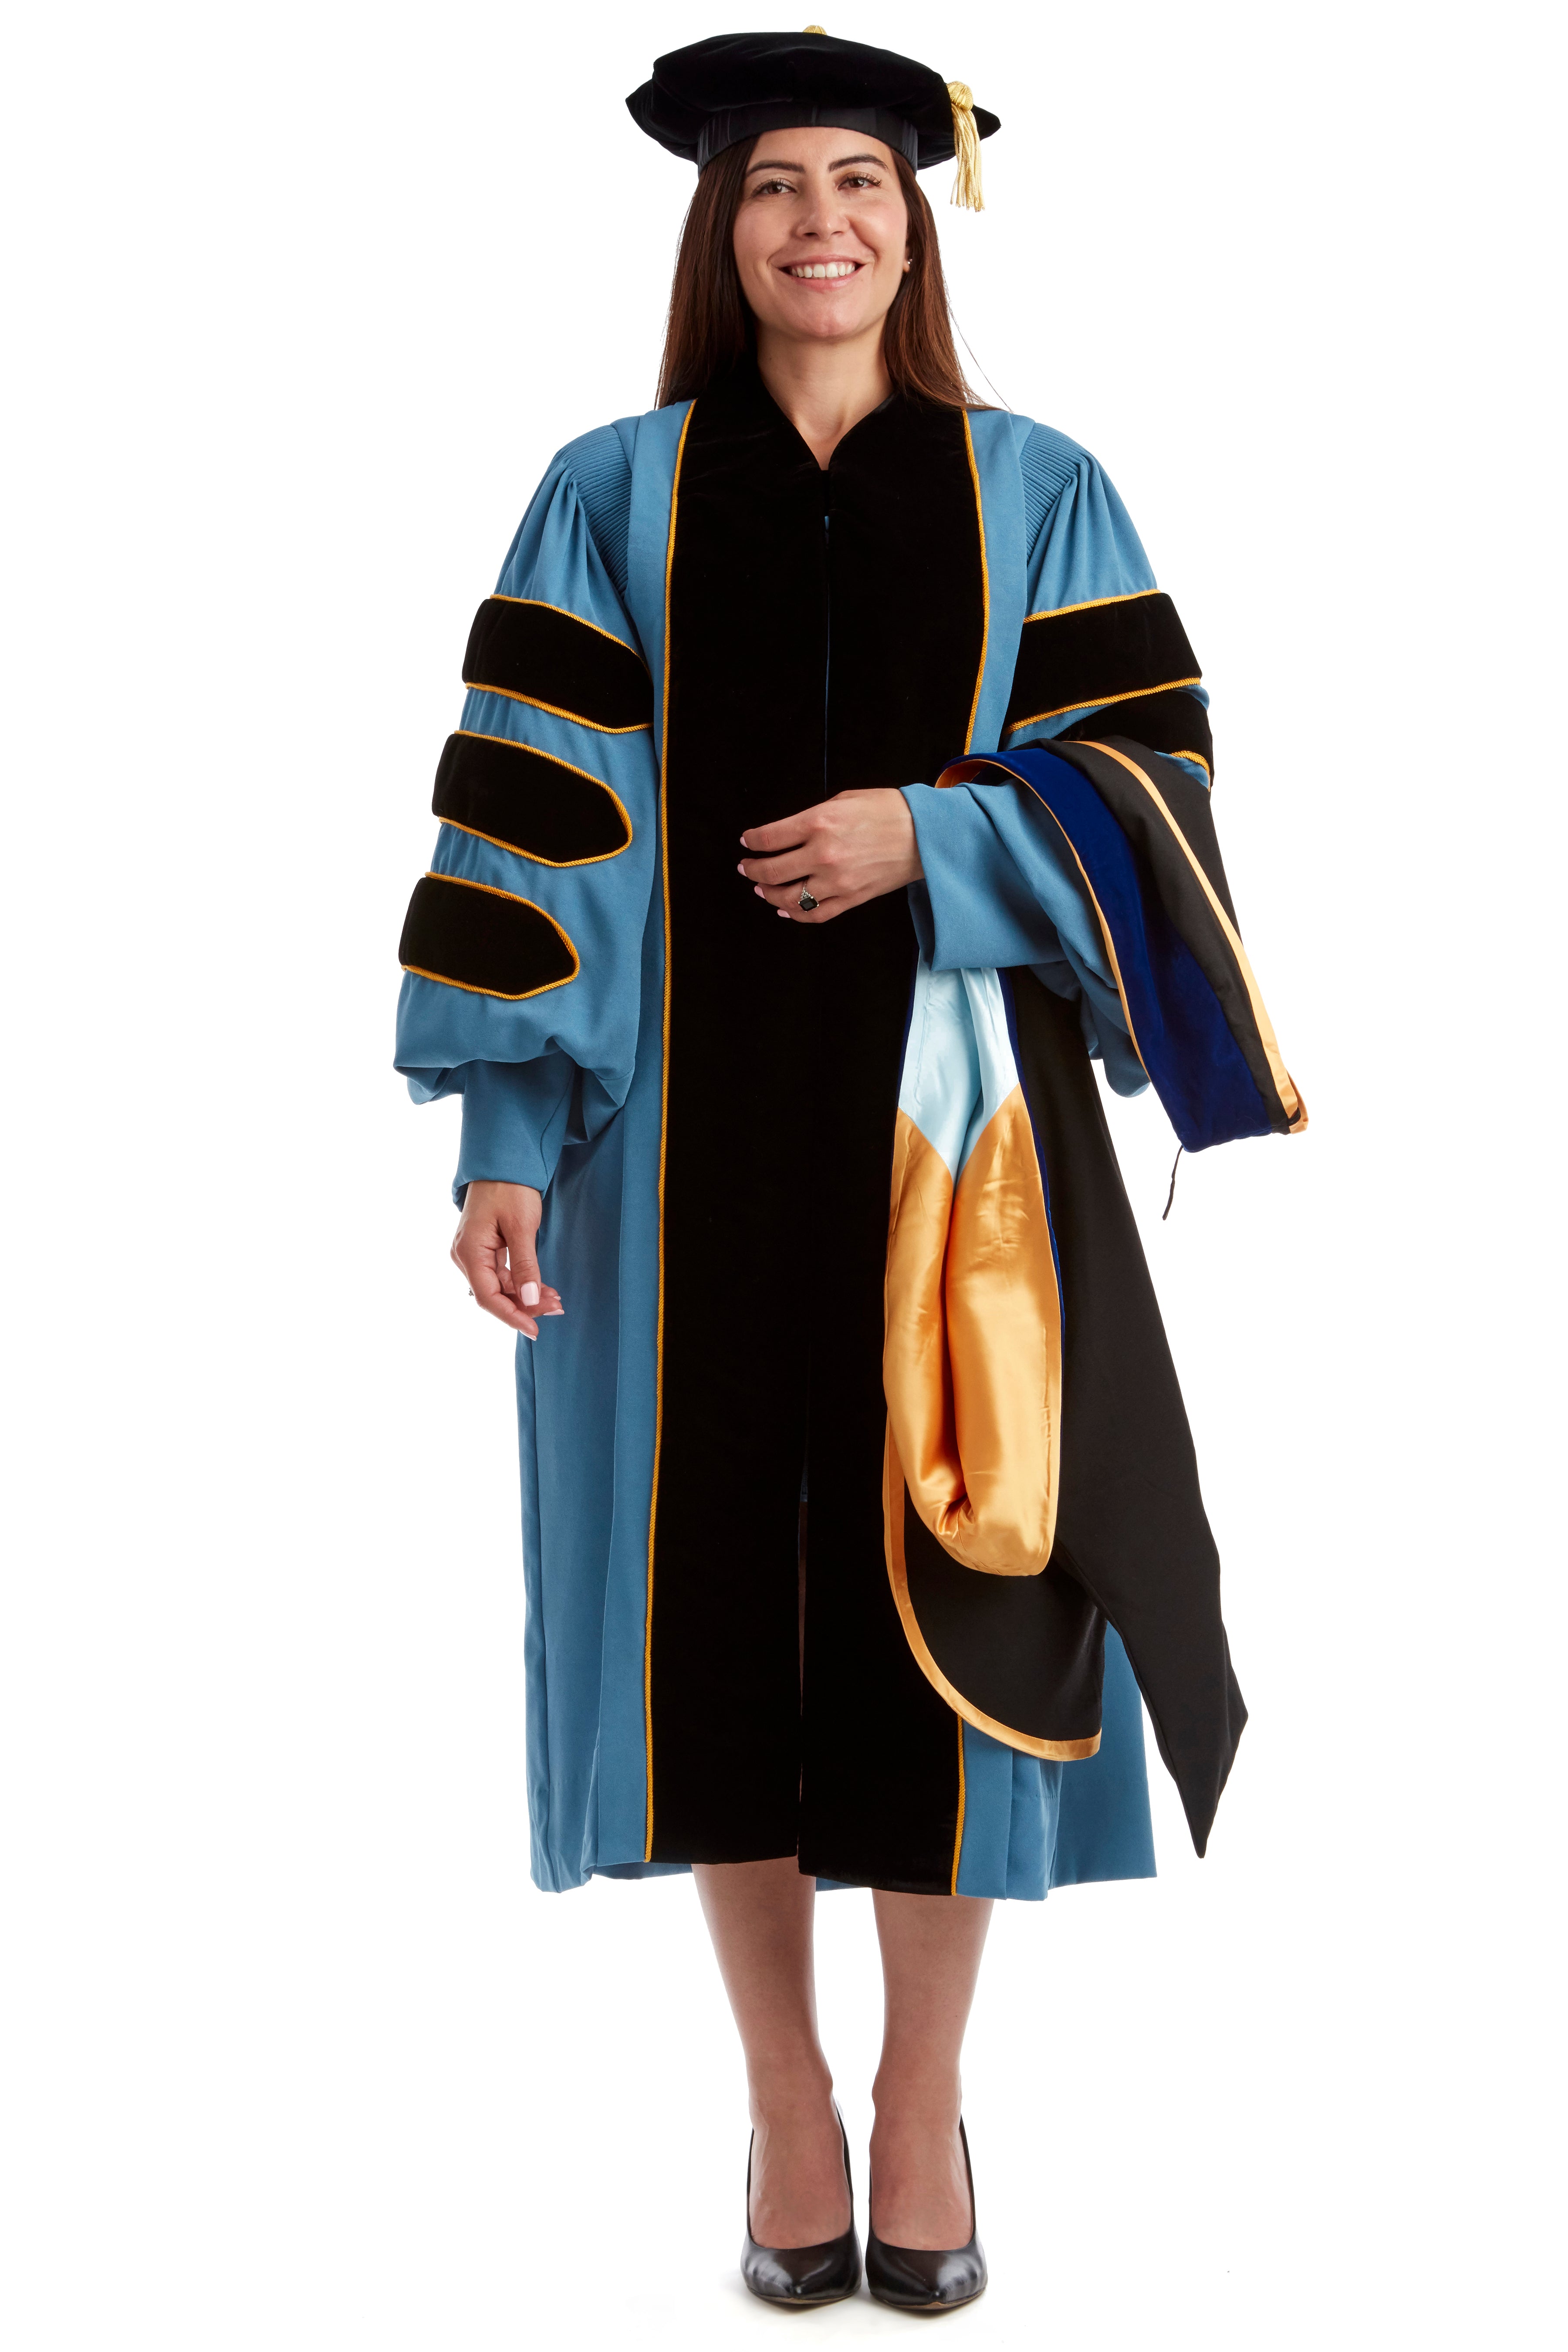 Dry Cleaning Black Polyester Convocation Gowns at Best Price in Delhi |  Shagun Gowns